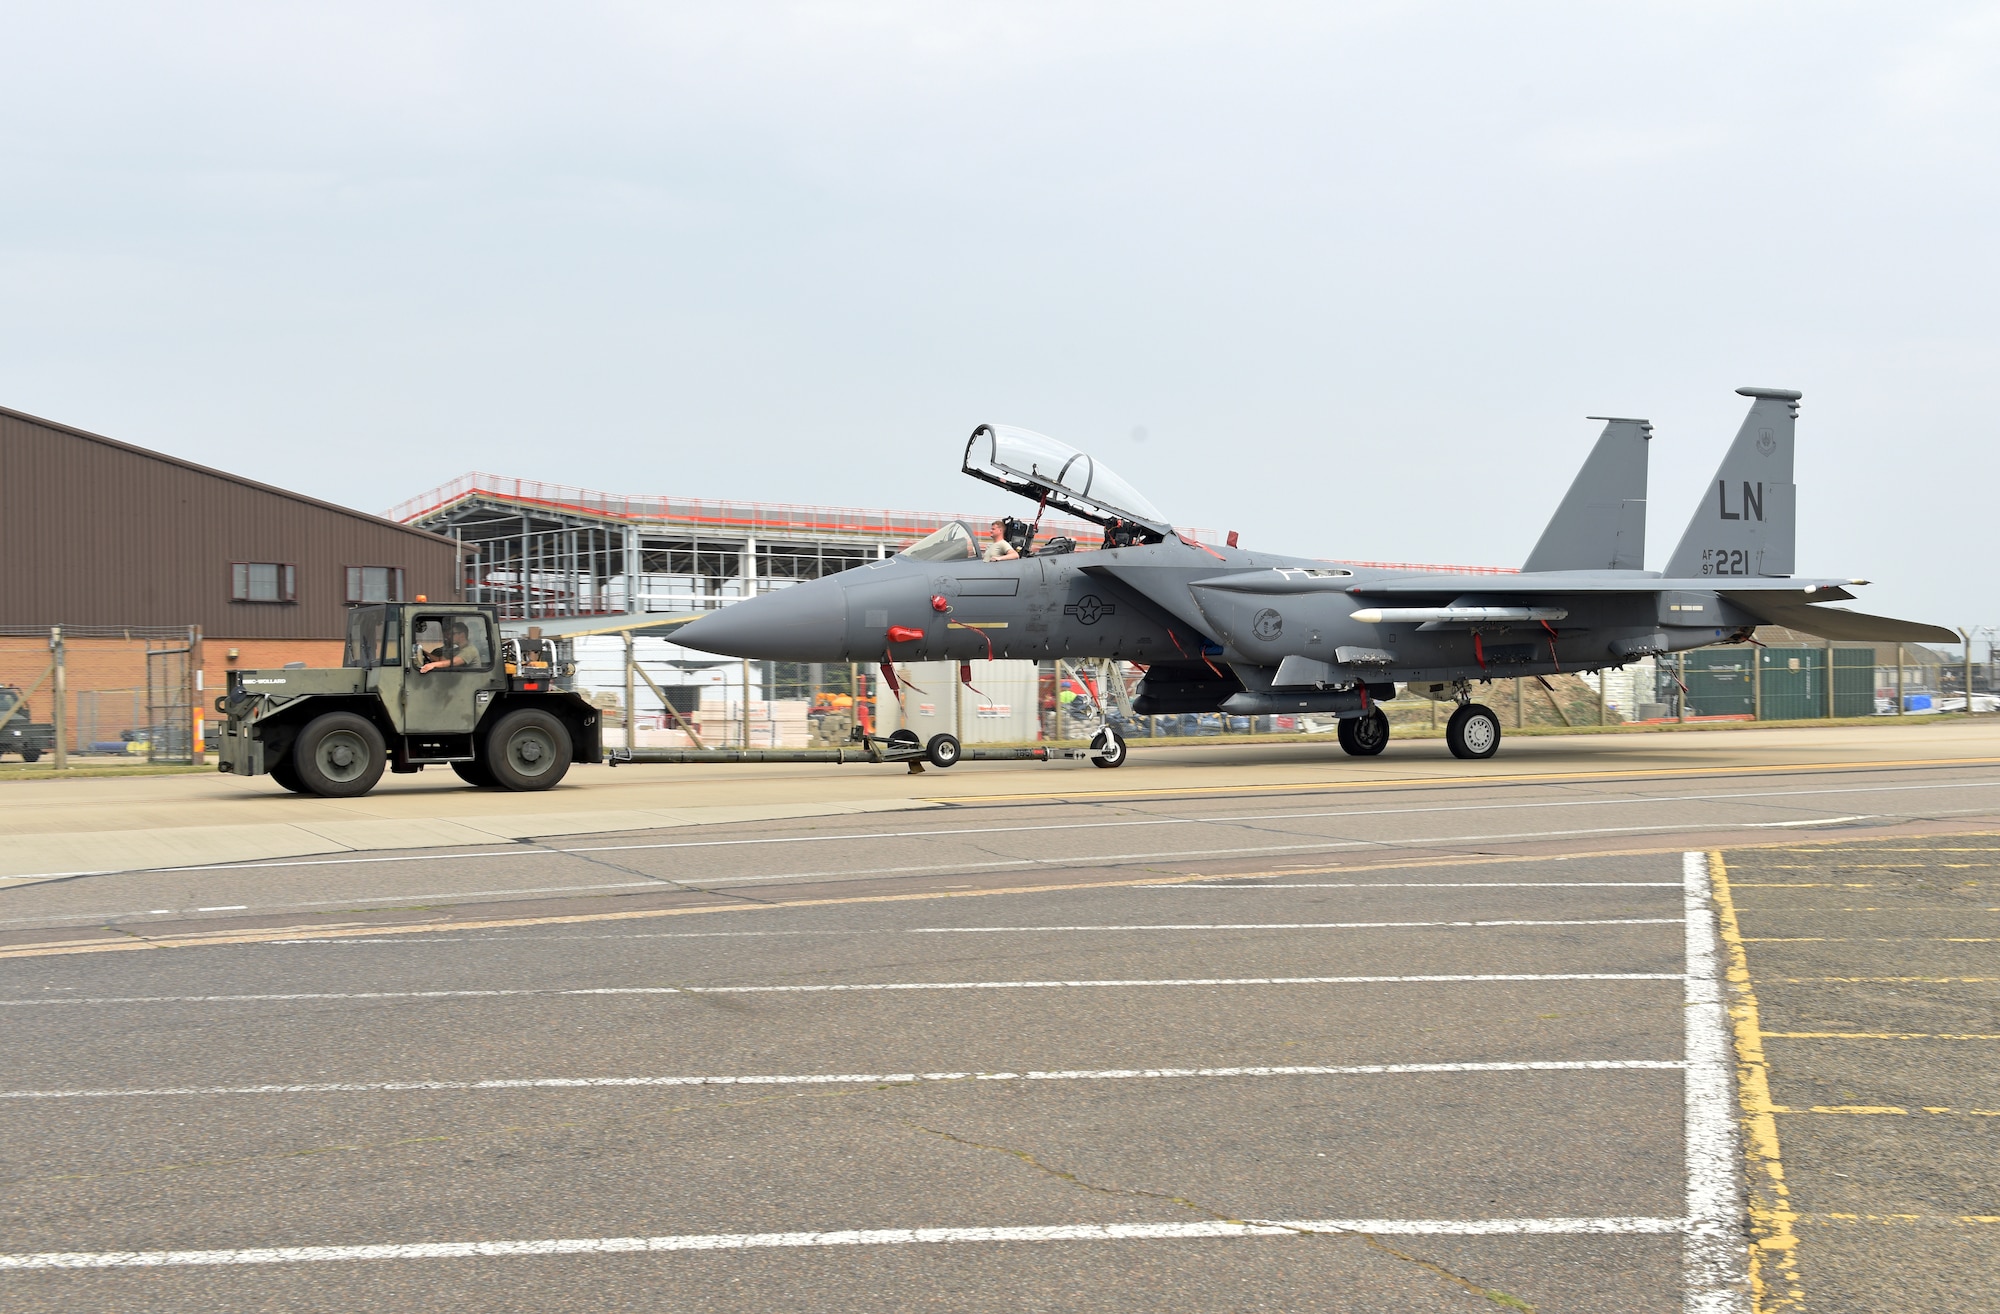 An F-15E Strike Eagle assigned to the 48th Fighter Wing is moved to the newly expanded parking ramp at Royal Air Force Lakenheath, England, Aug. 11, 2020. The ramp’s completion signified another key milestone as the 48th Fighter Wing prepares to welcome its first F-35A aircraft in late 2021. (U.S. Air Force photo by Airman 1st Class Rhonda Smith)